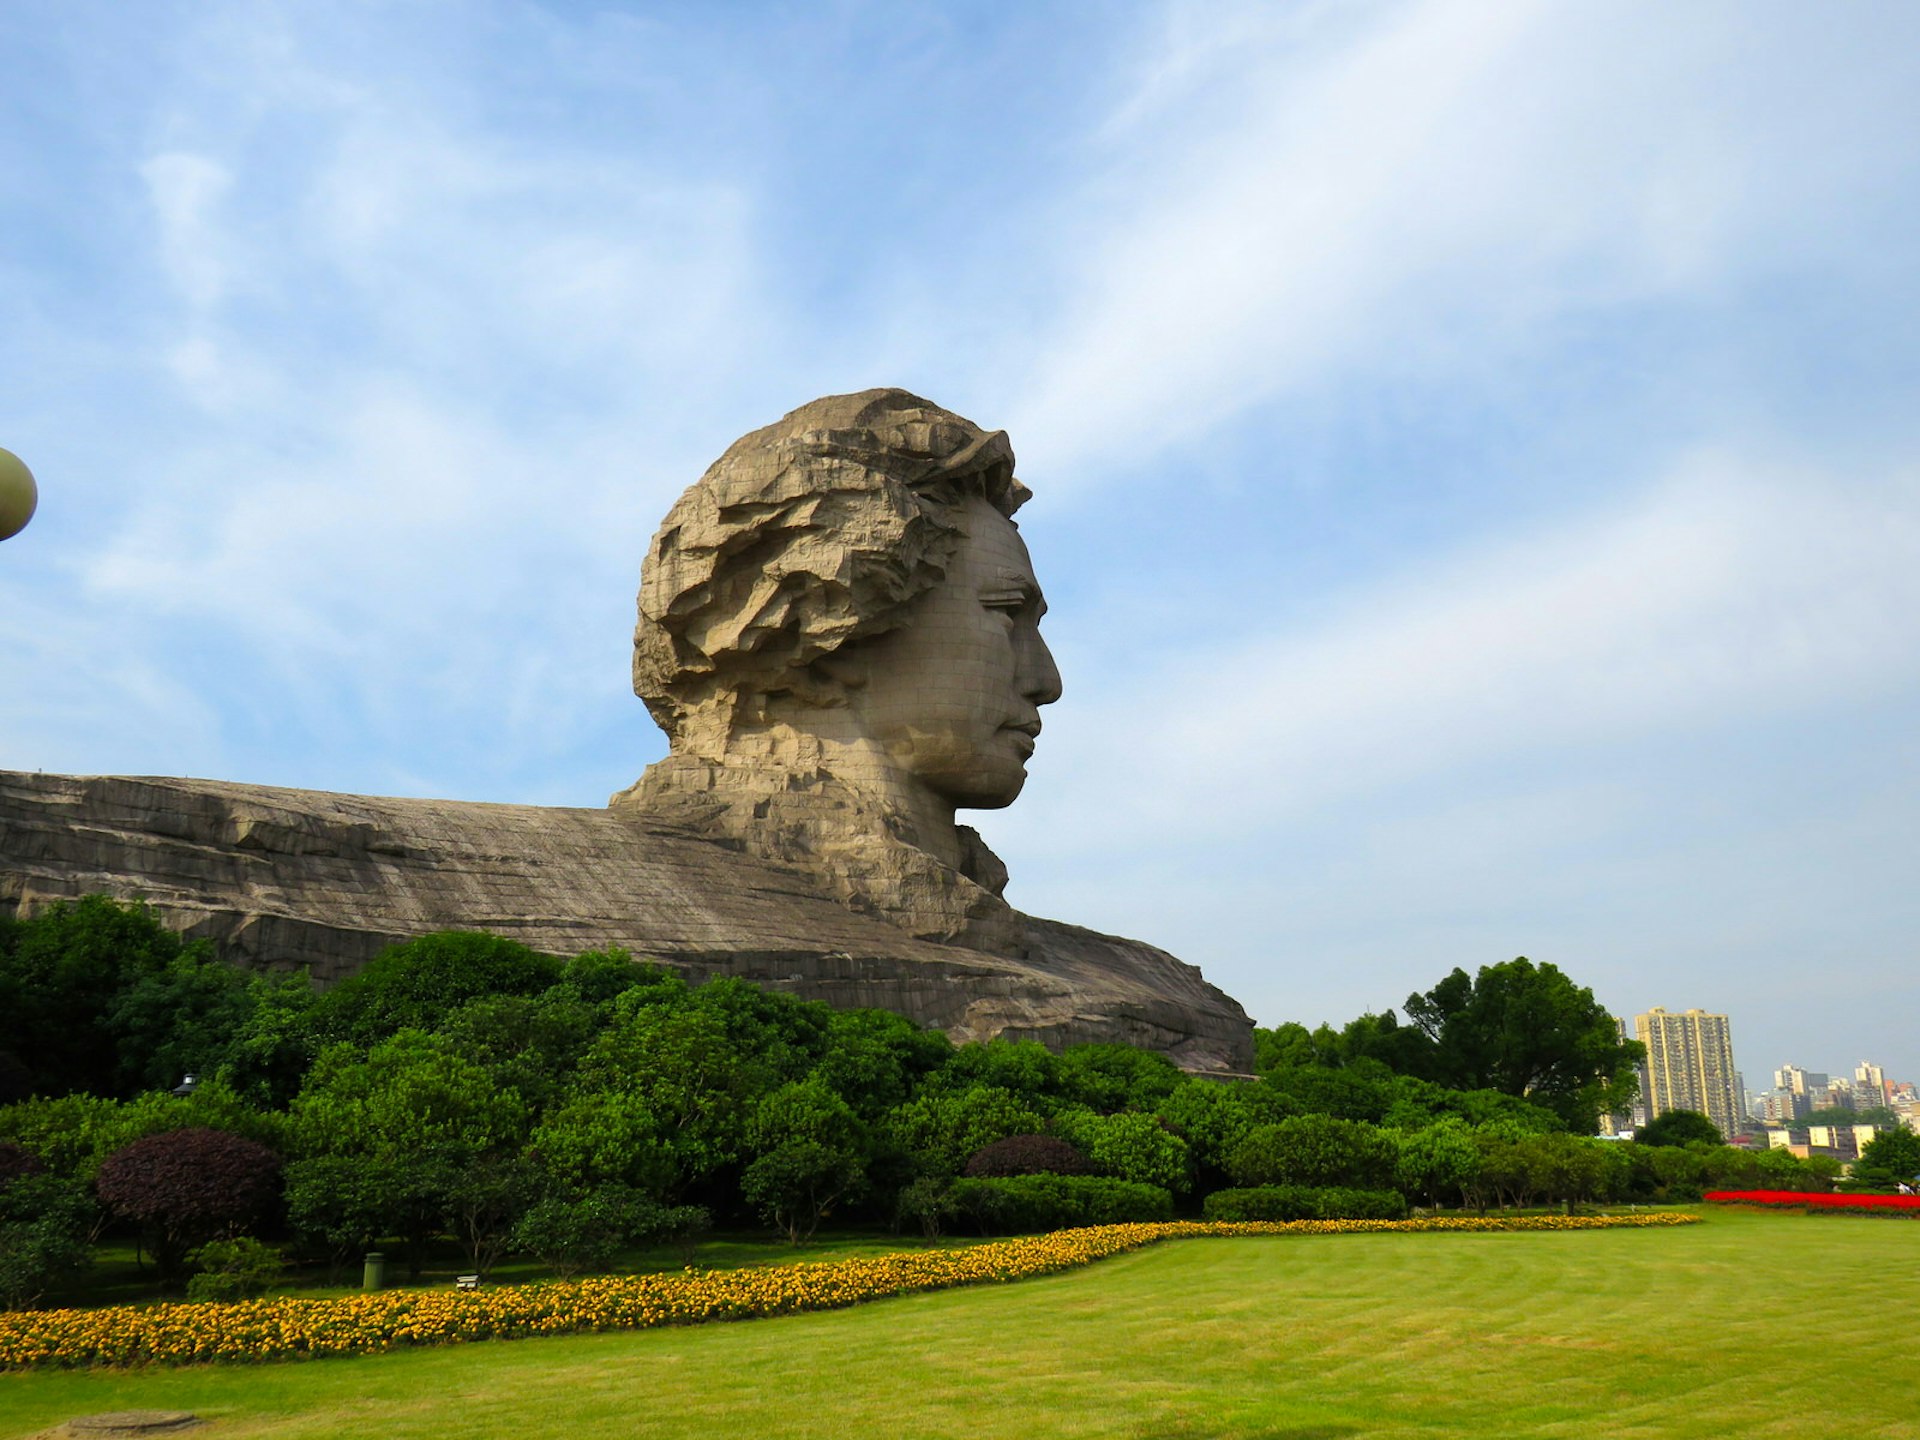 The towering granite bust of Mao as a young man, located at the south end of Tangerine Island © Ethan Gelber / Lonely Planet